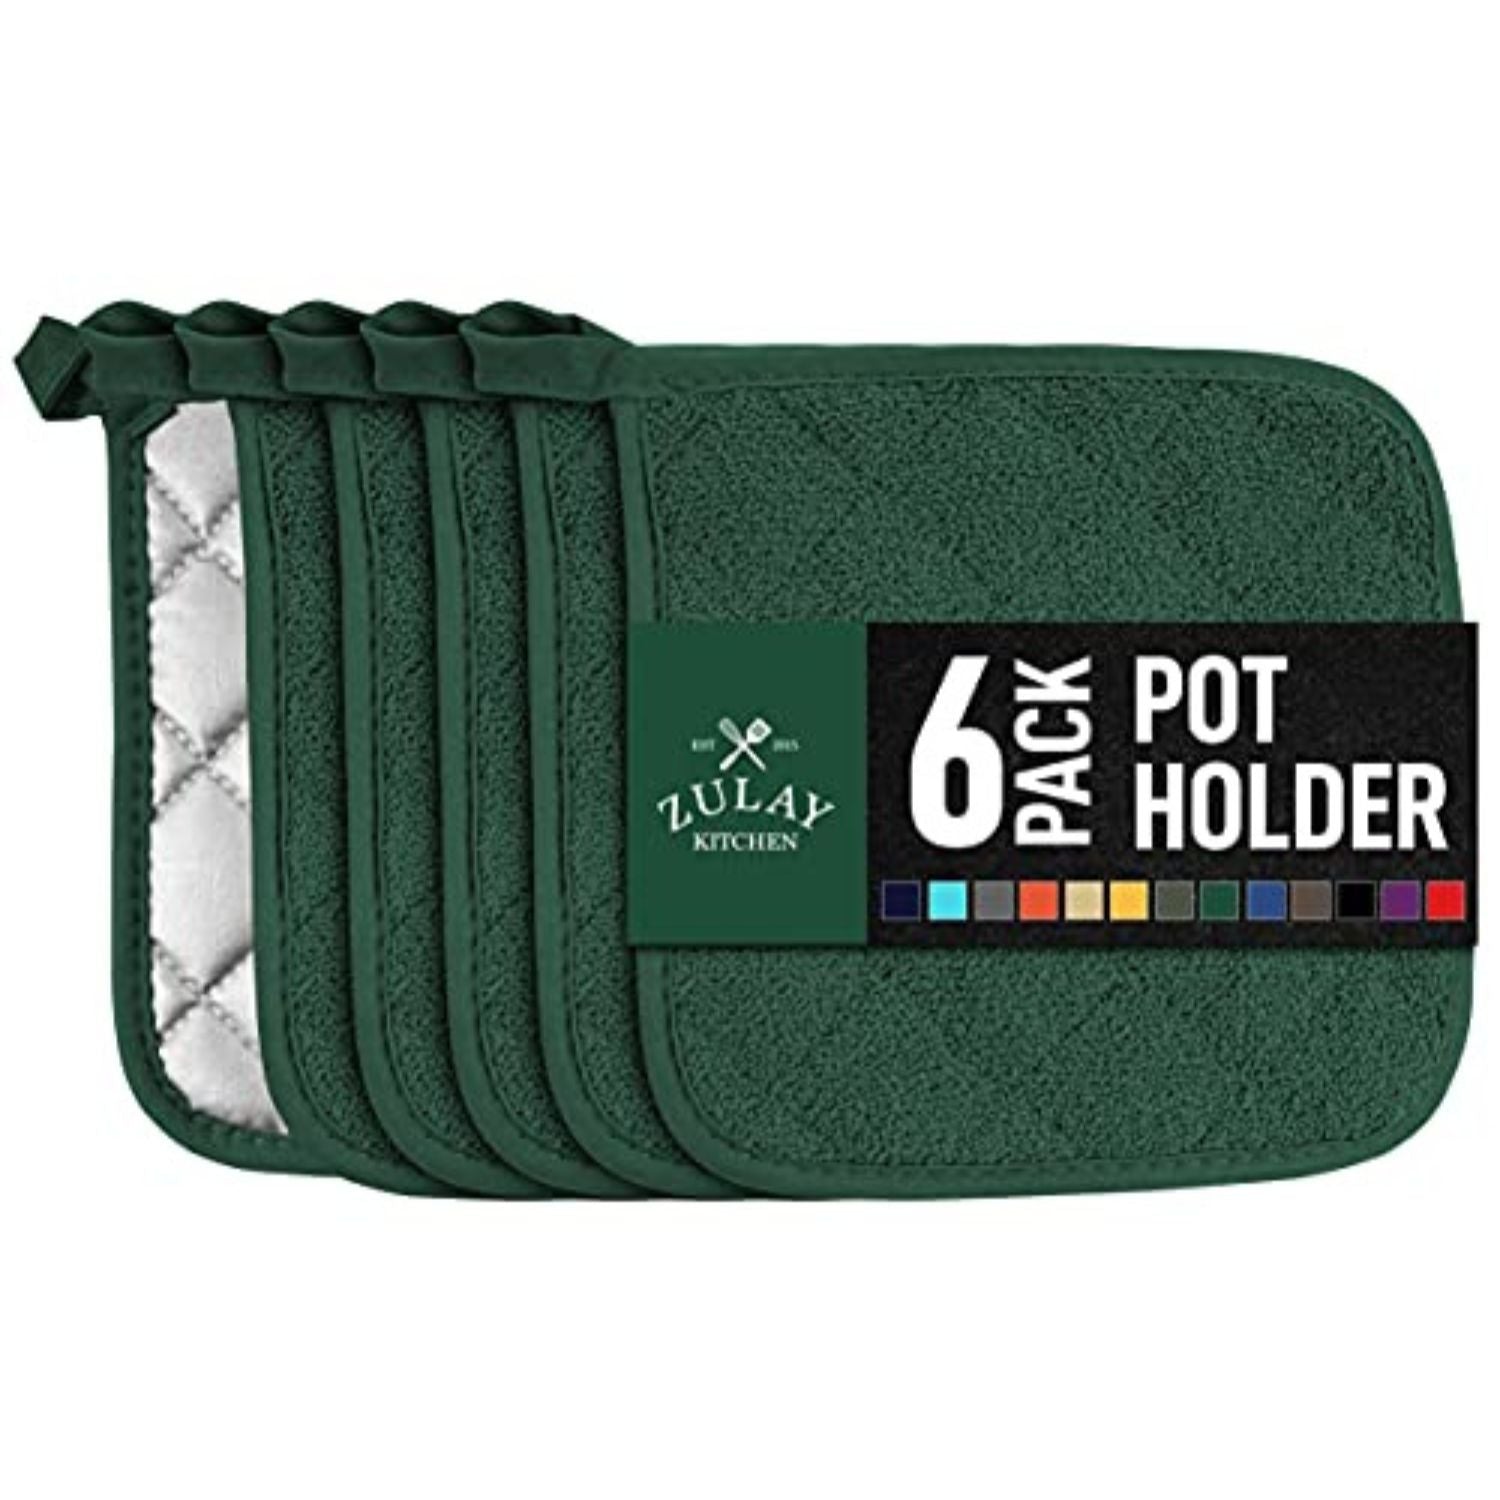 Pot Holders Set - 6 Pack Quilted Terry Cloth Potholders 7x7 Inch